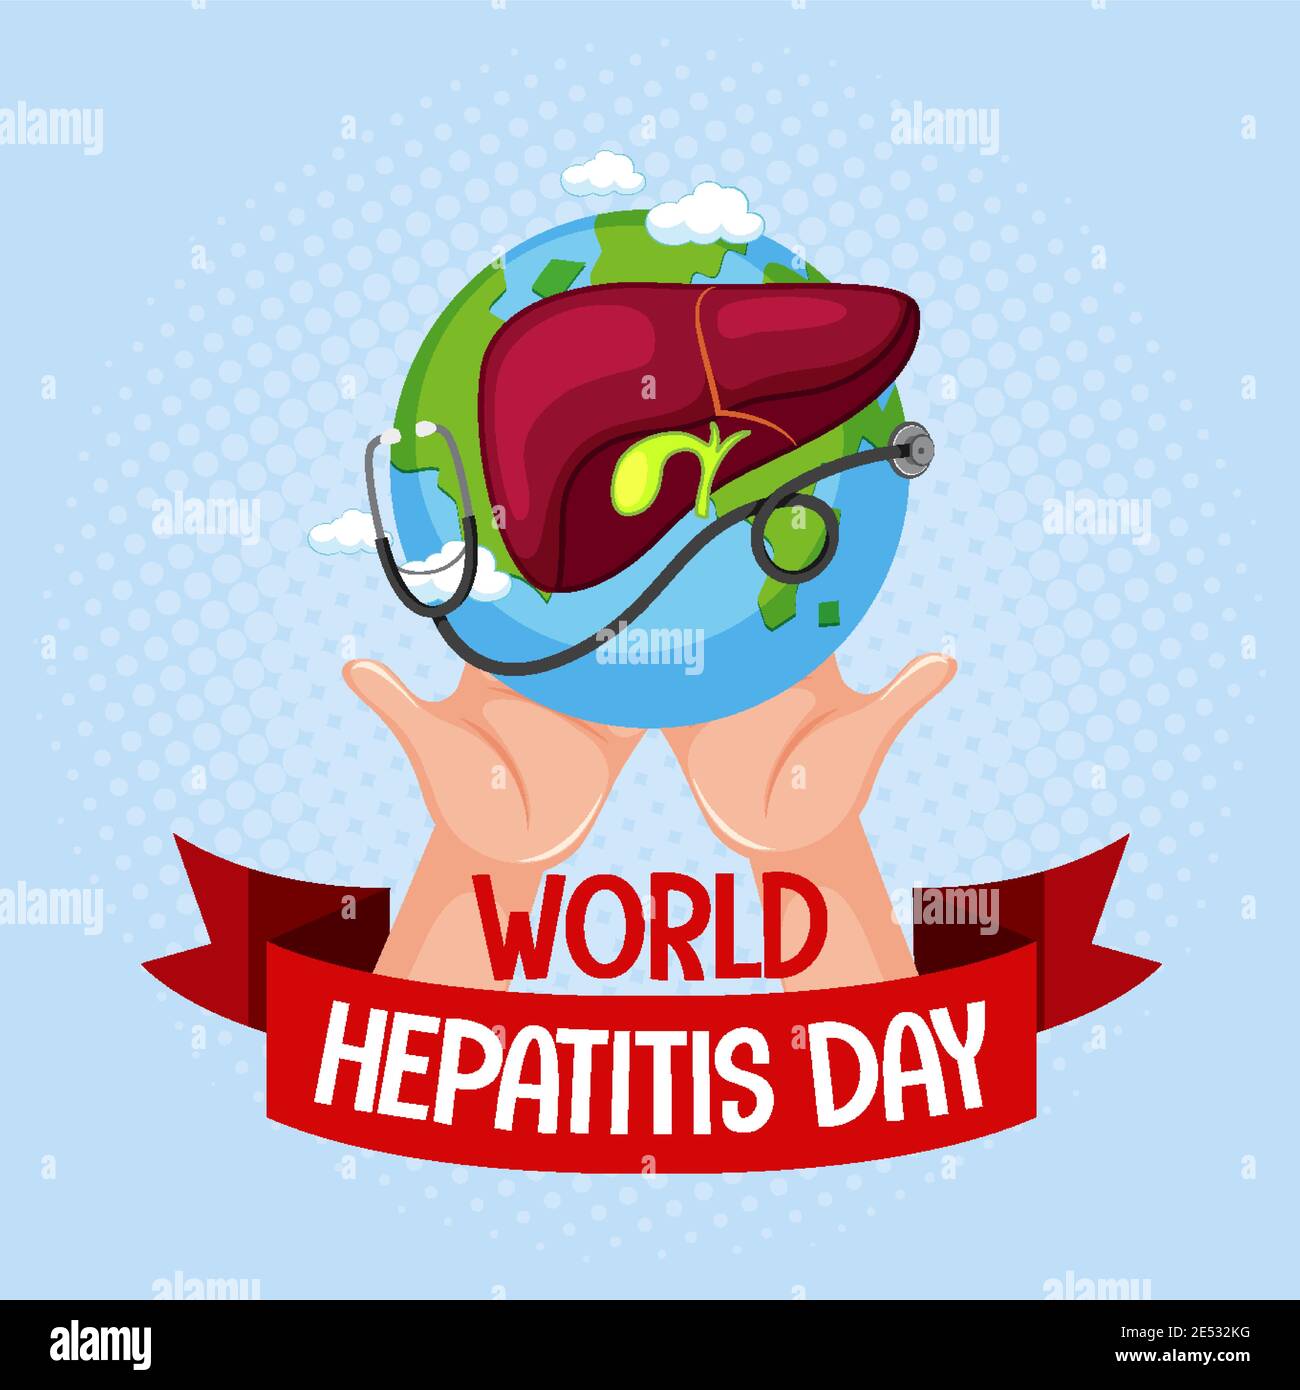 World Hepatitis Day logo or banner with hands holding liver and